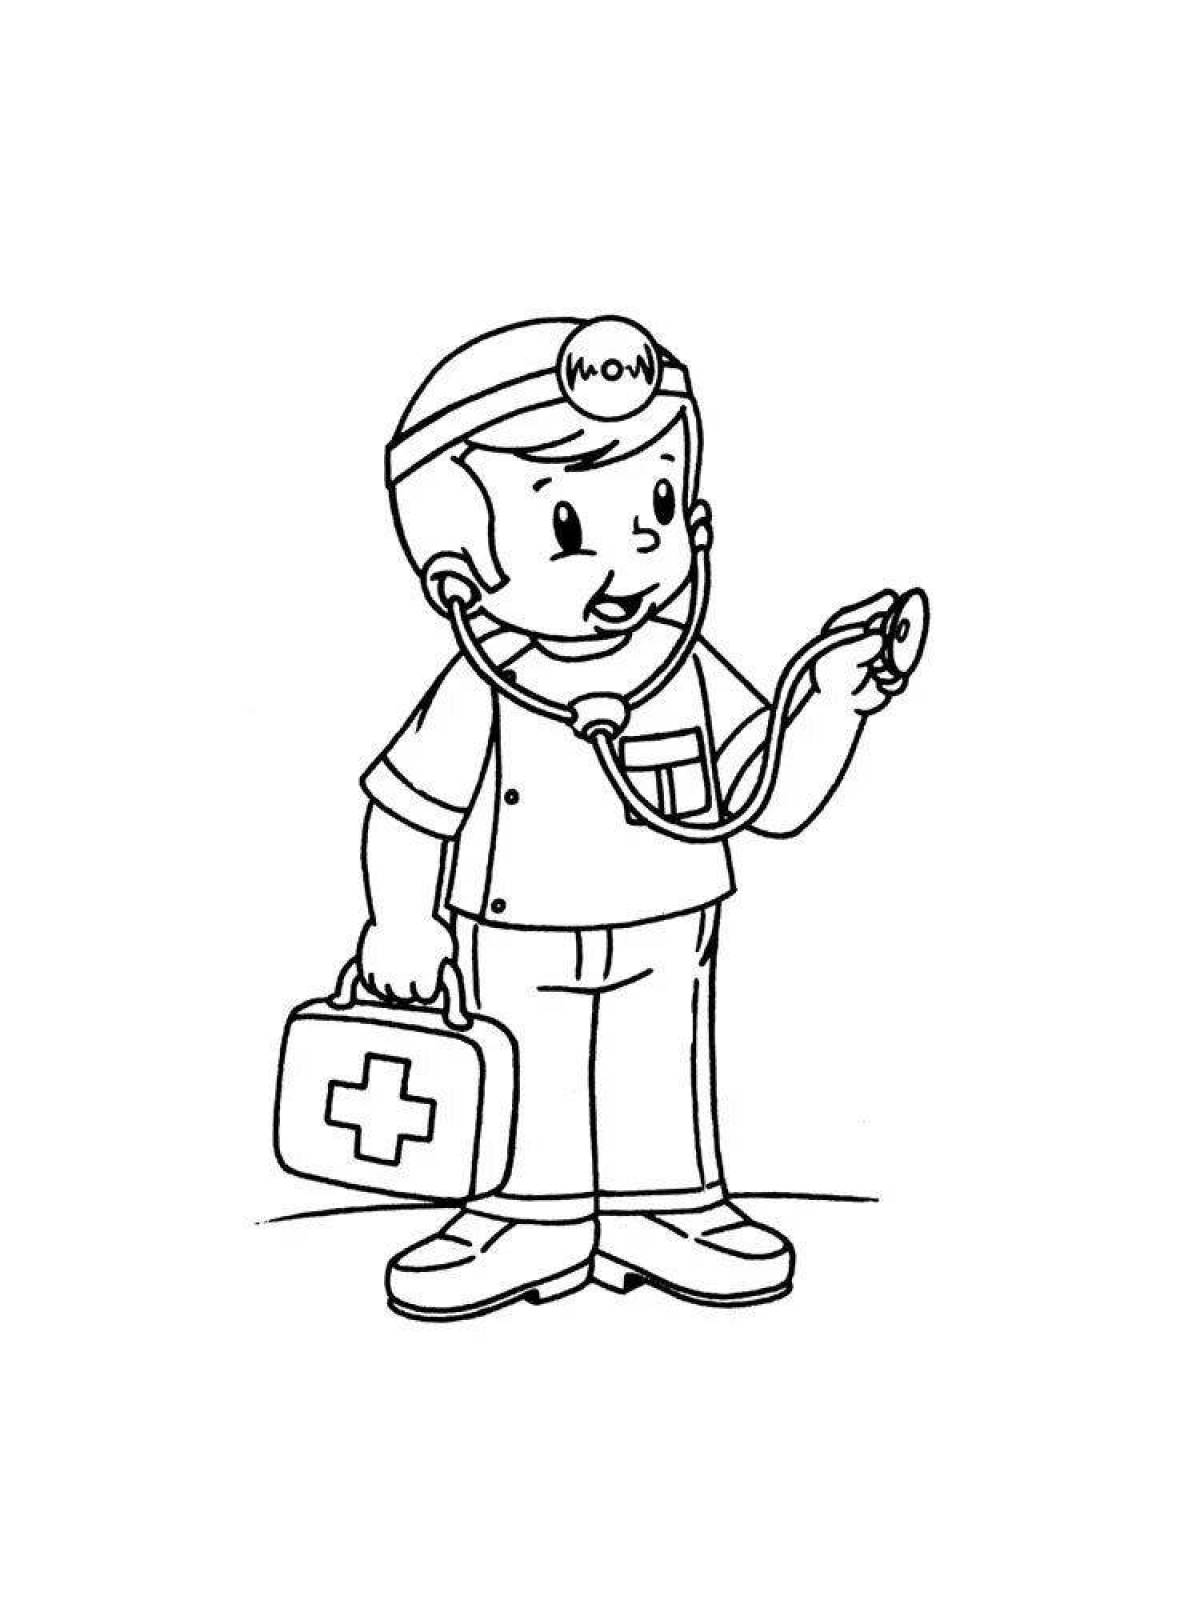 Coloring page funny doctor for kids